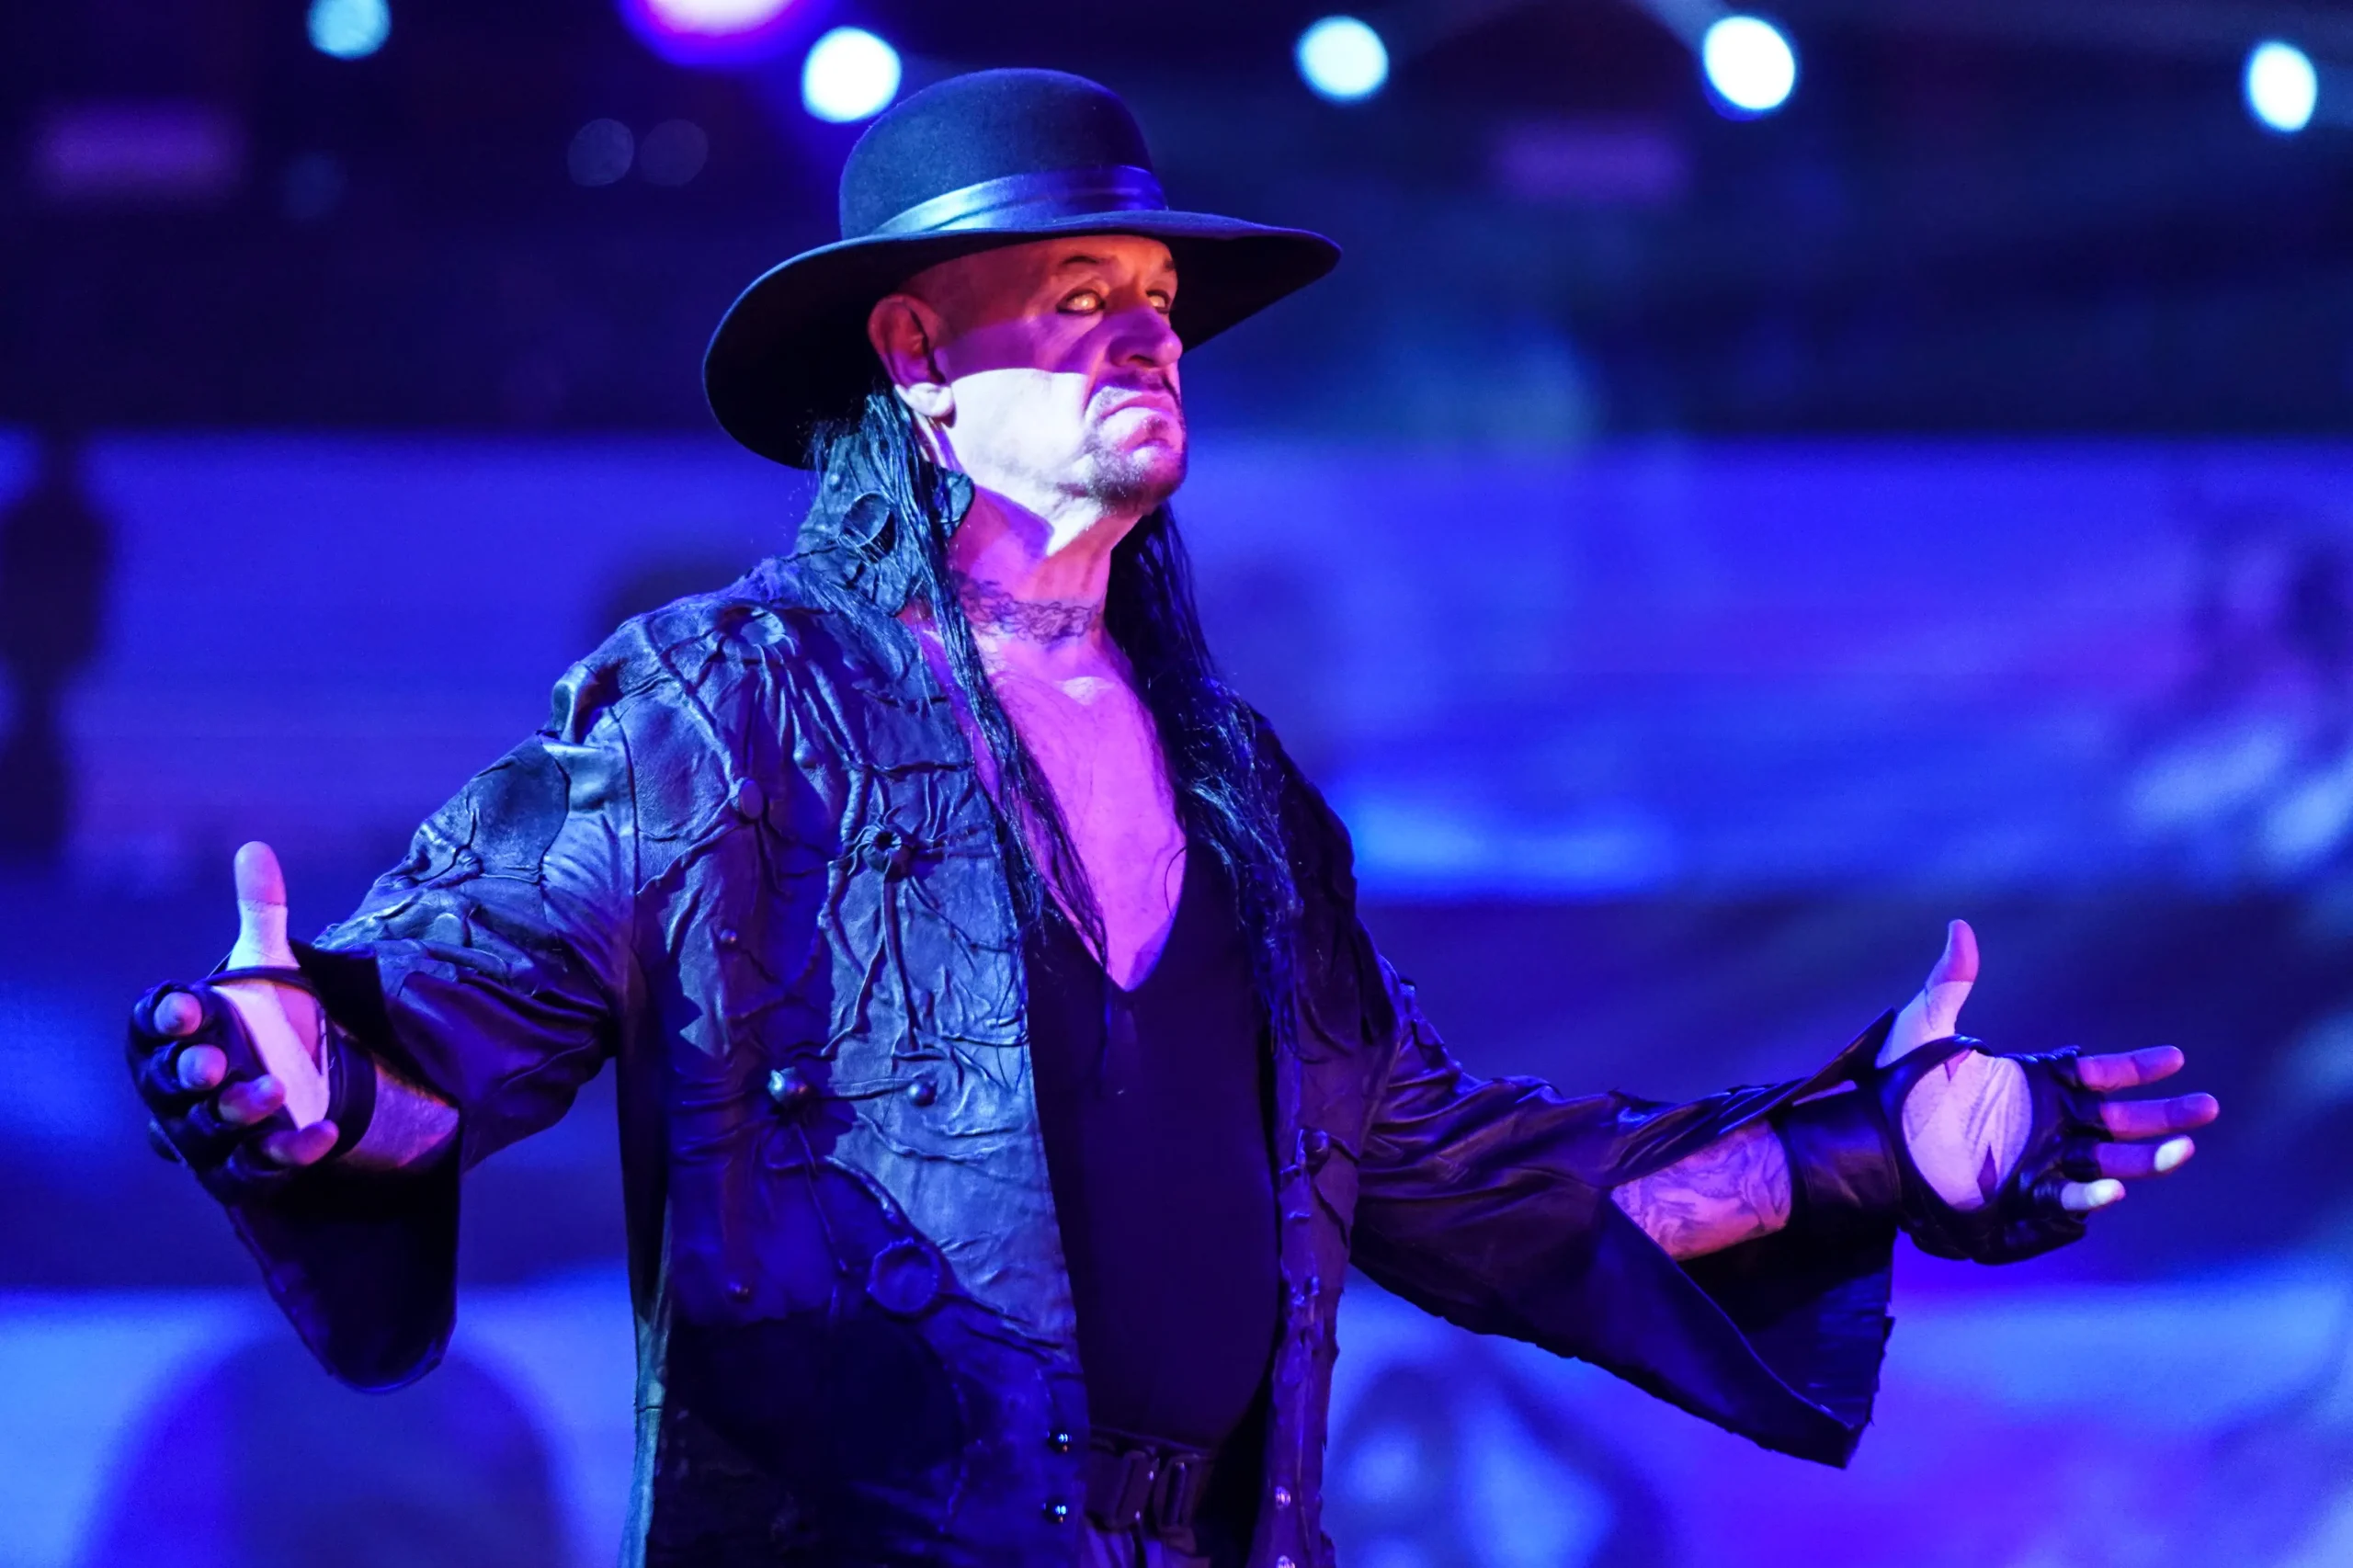 Undertaker Unveils Behind-the-Scenes Account of His Involvement in Narrating the Bray Wyatt Documentary